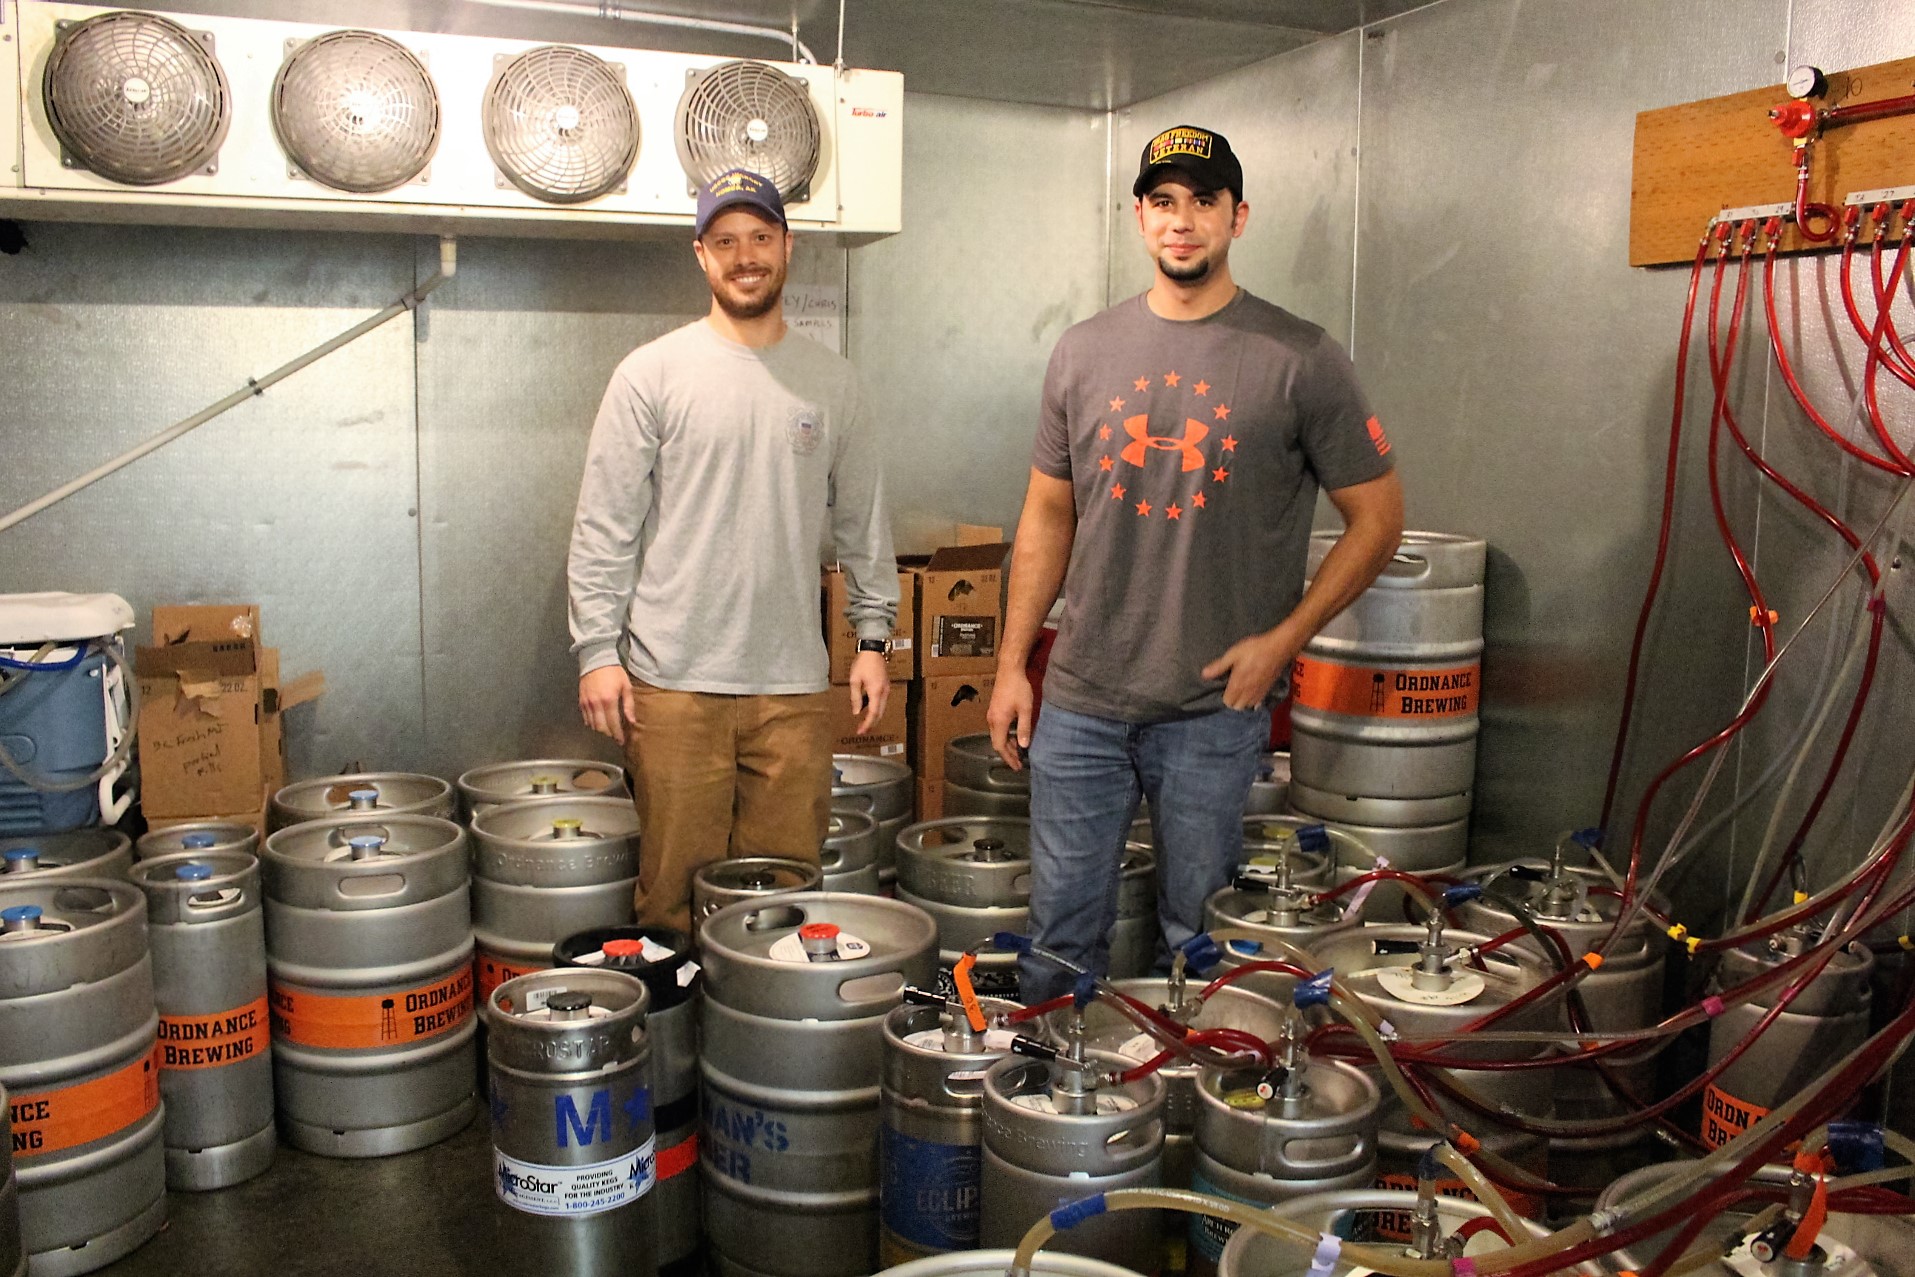 ordnance brewing honoRED